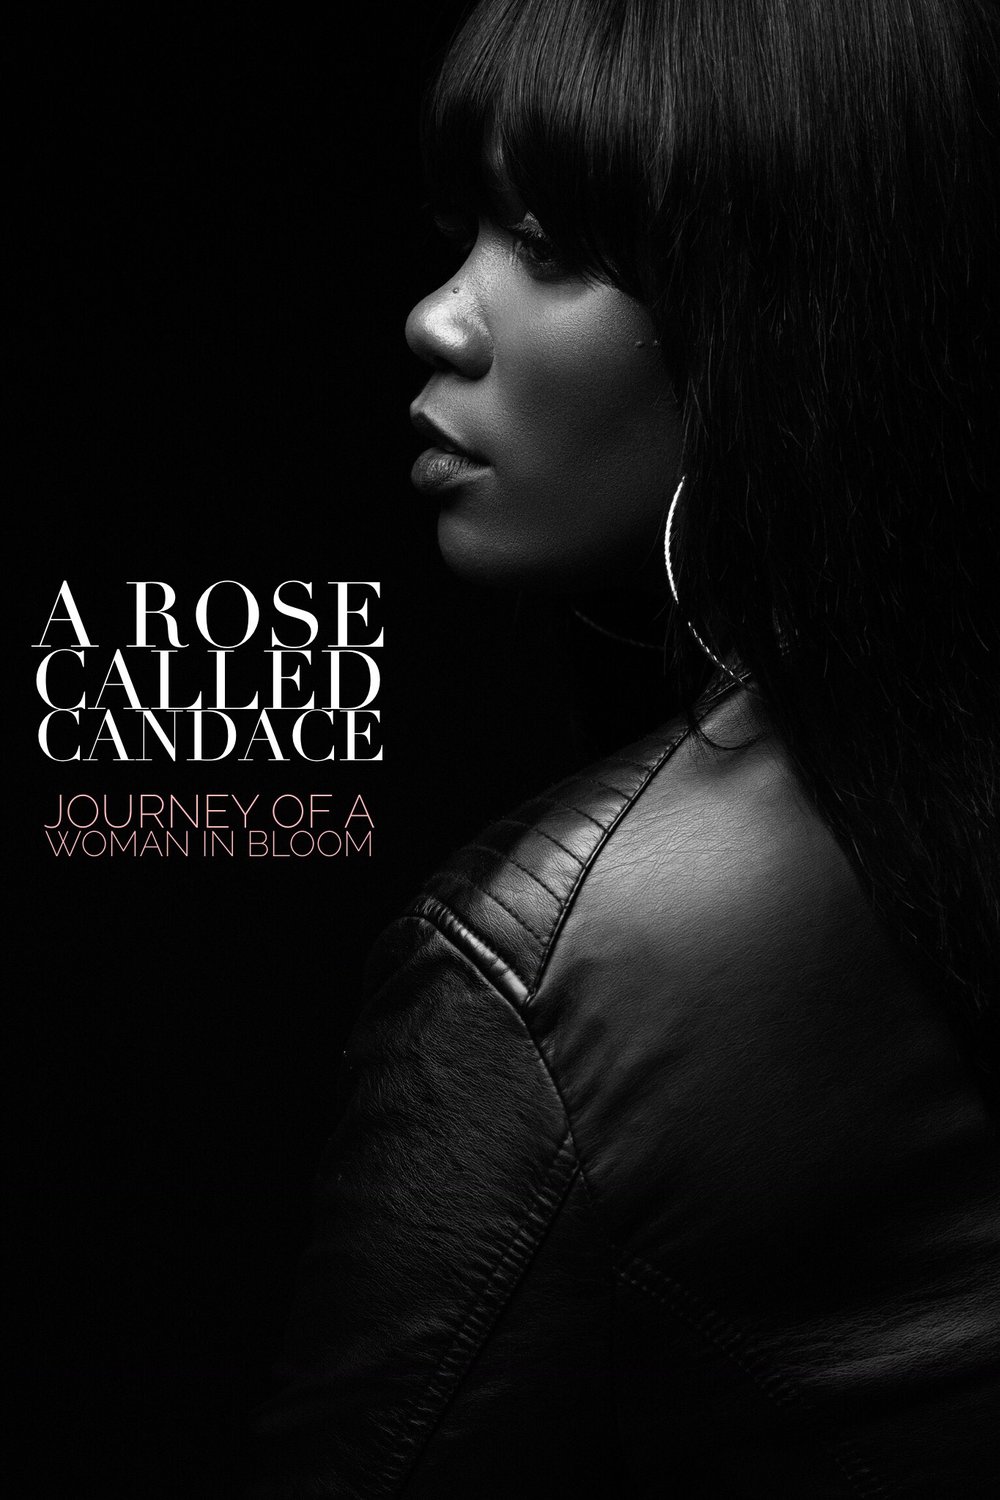 Solo Show: A Rose Called Candace